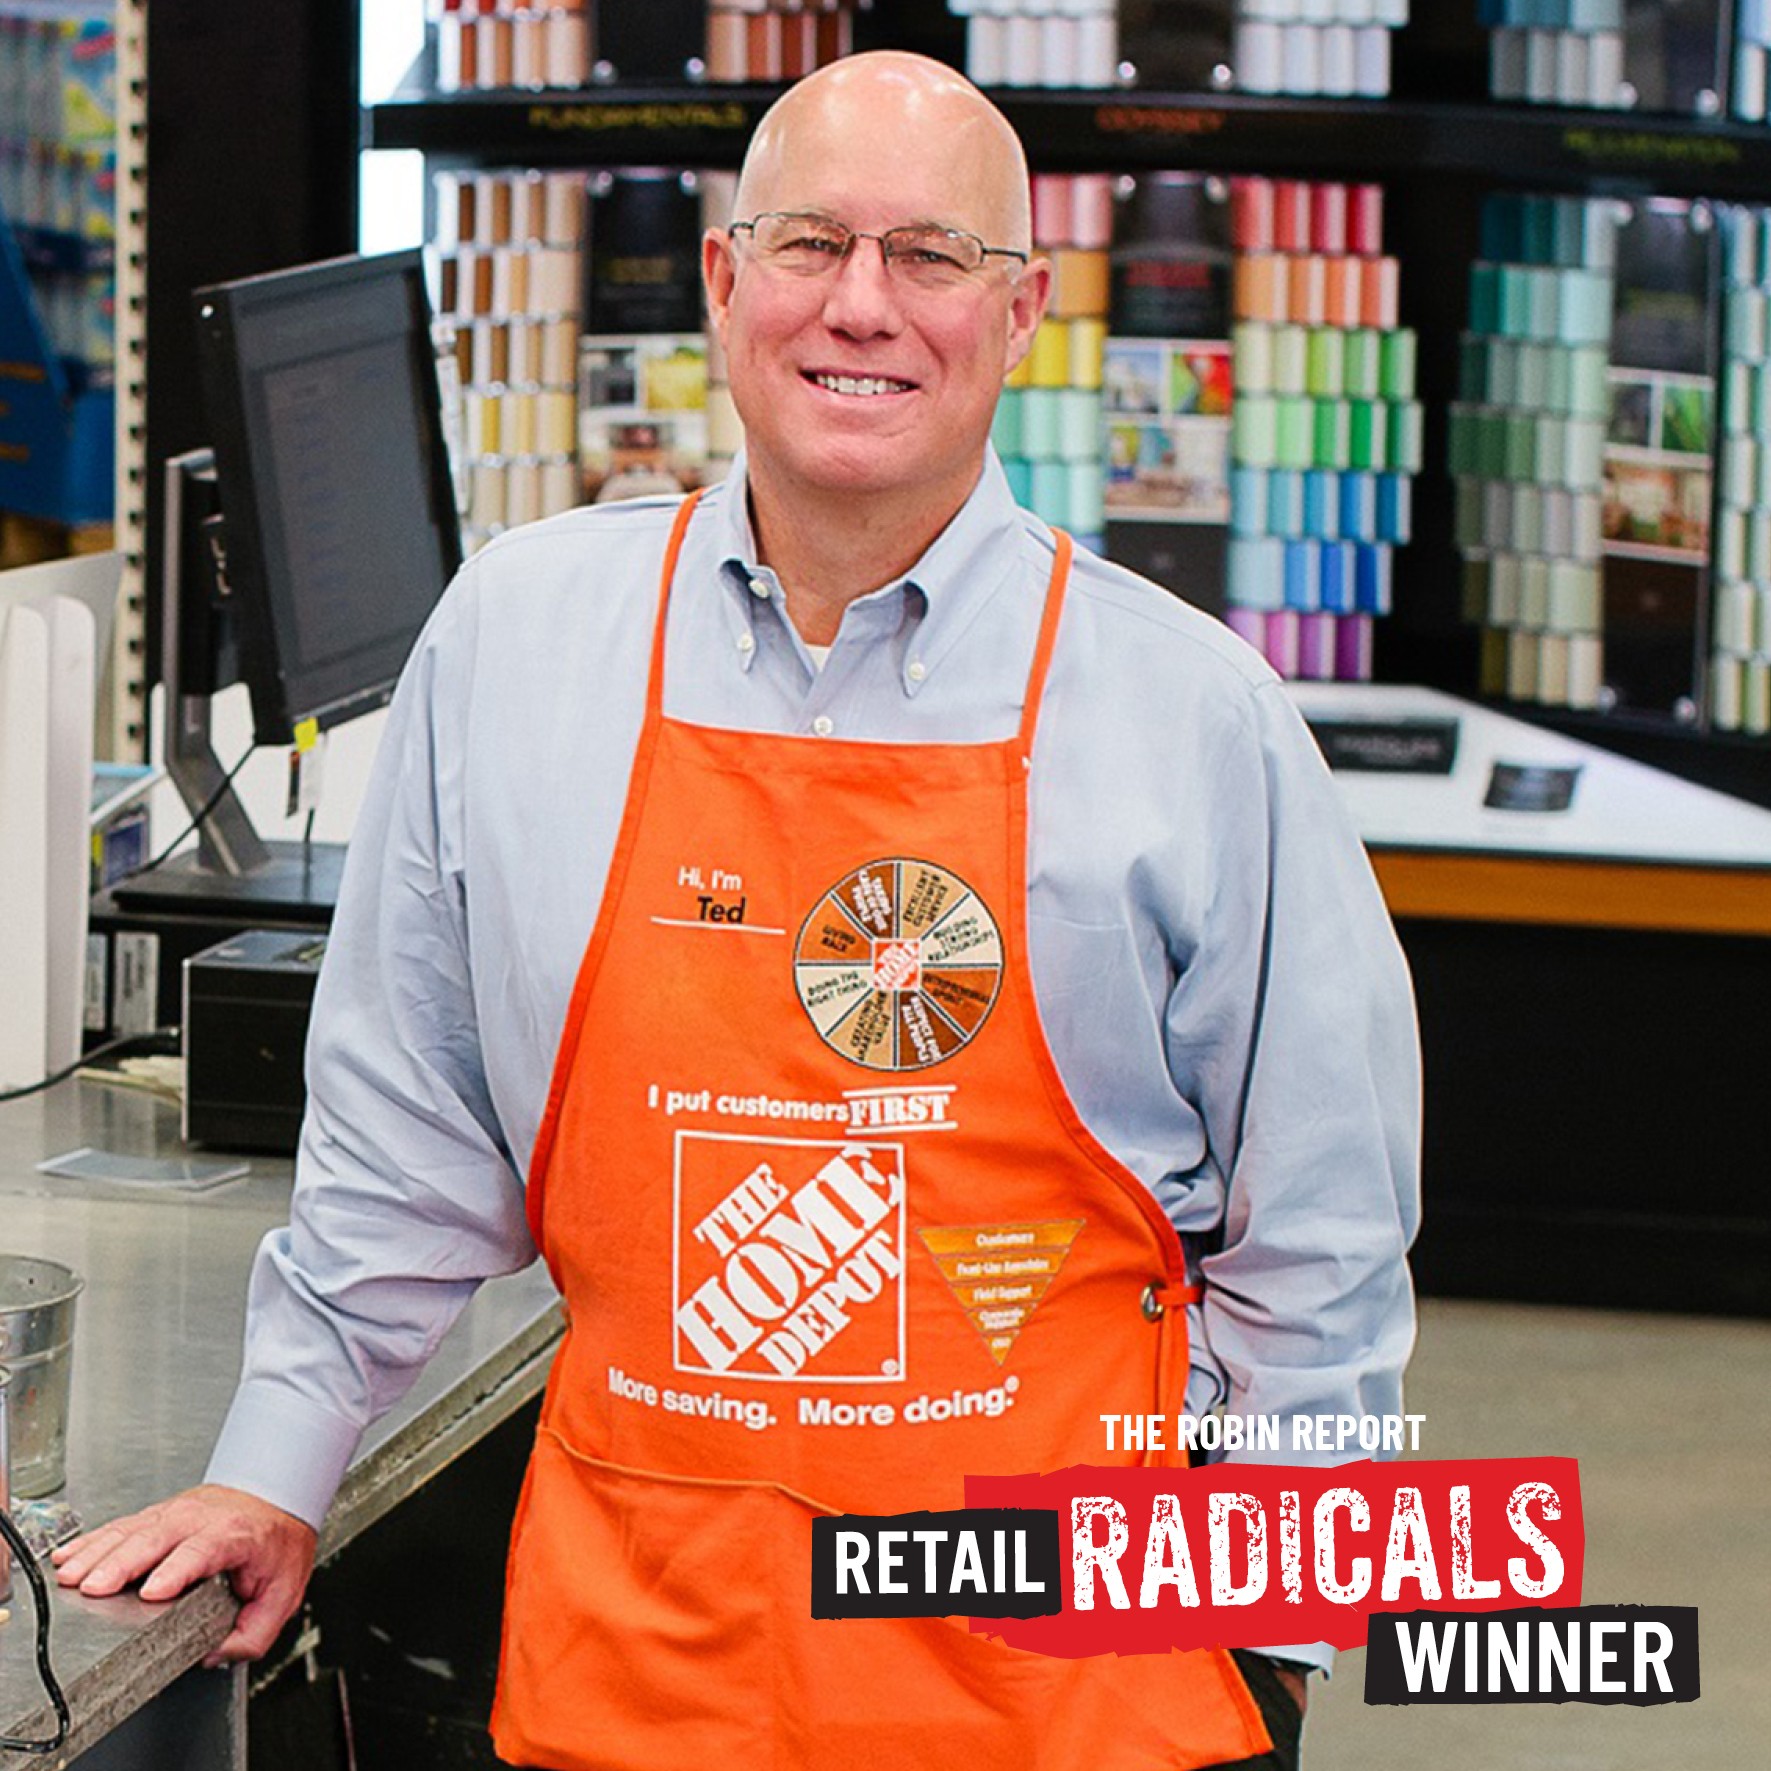 Home Depot Redefines a Retail Radical - The Robin Report